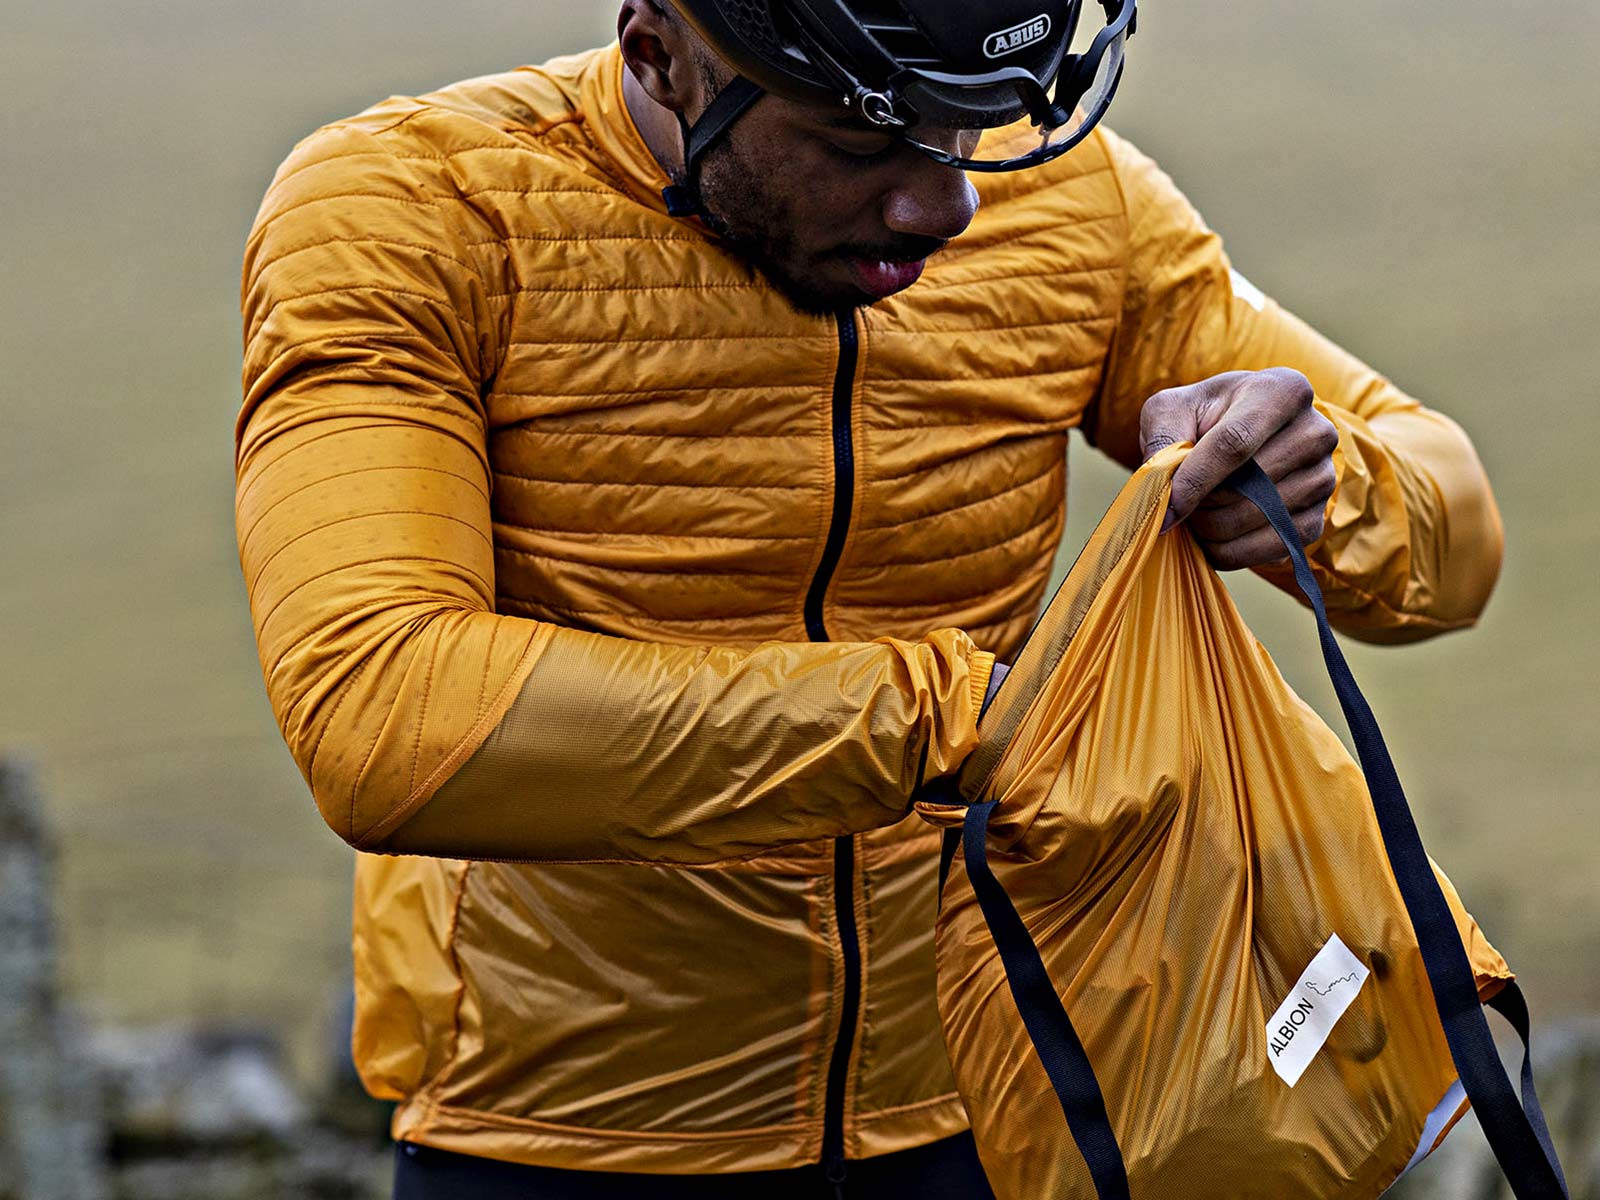 Albion Ultralight Insulated Jacket, ultra lightweight packable breathable eco cycling jacket and backpack, packing